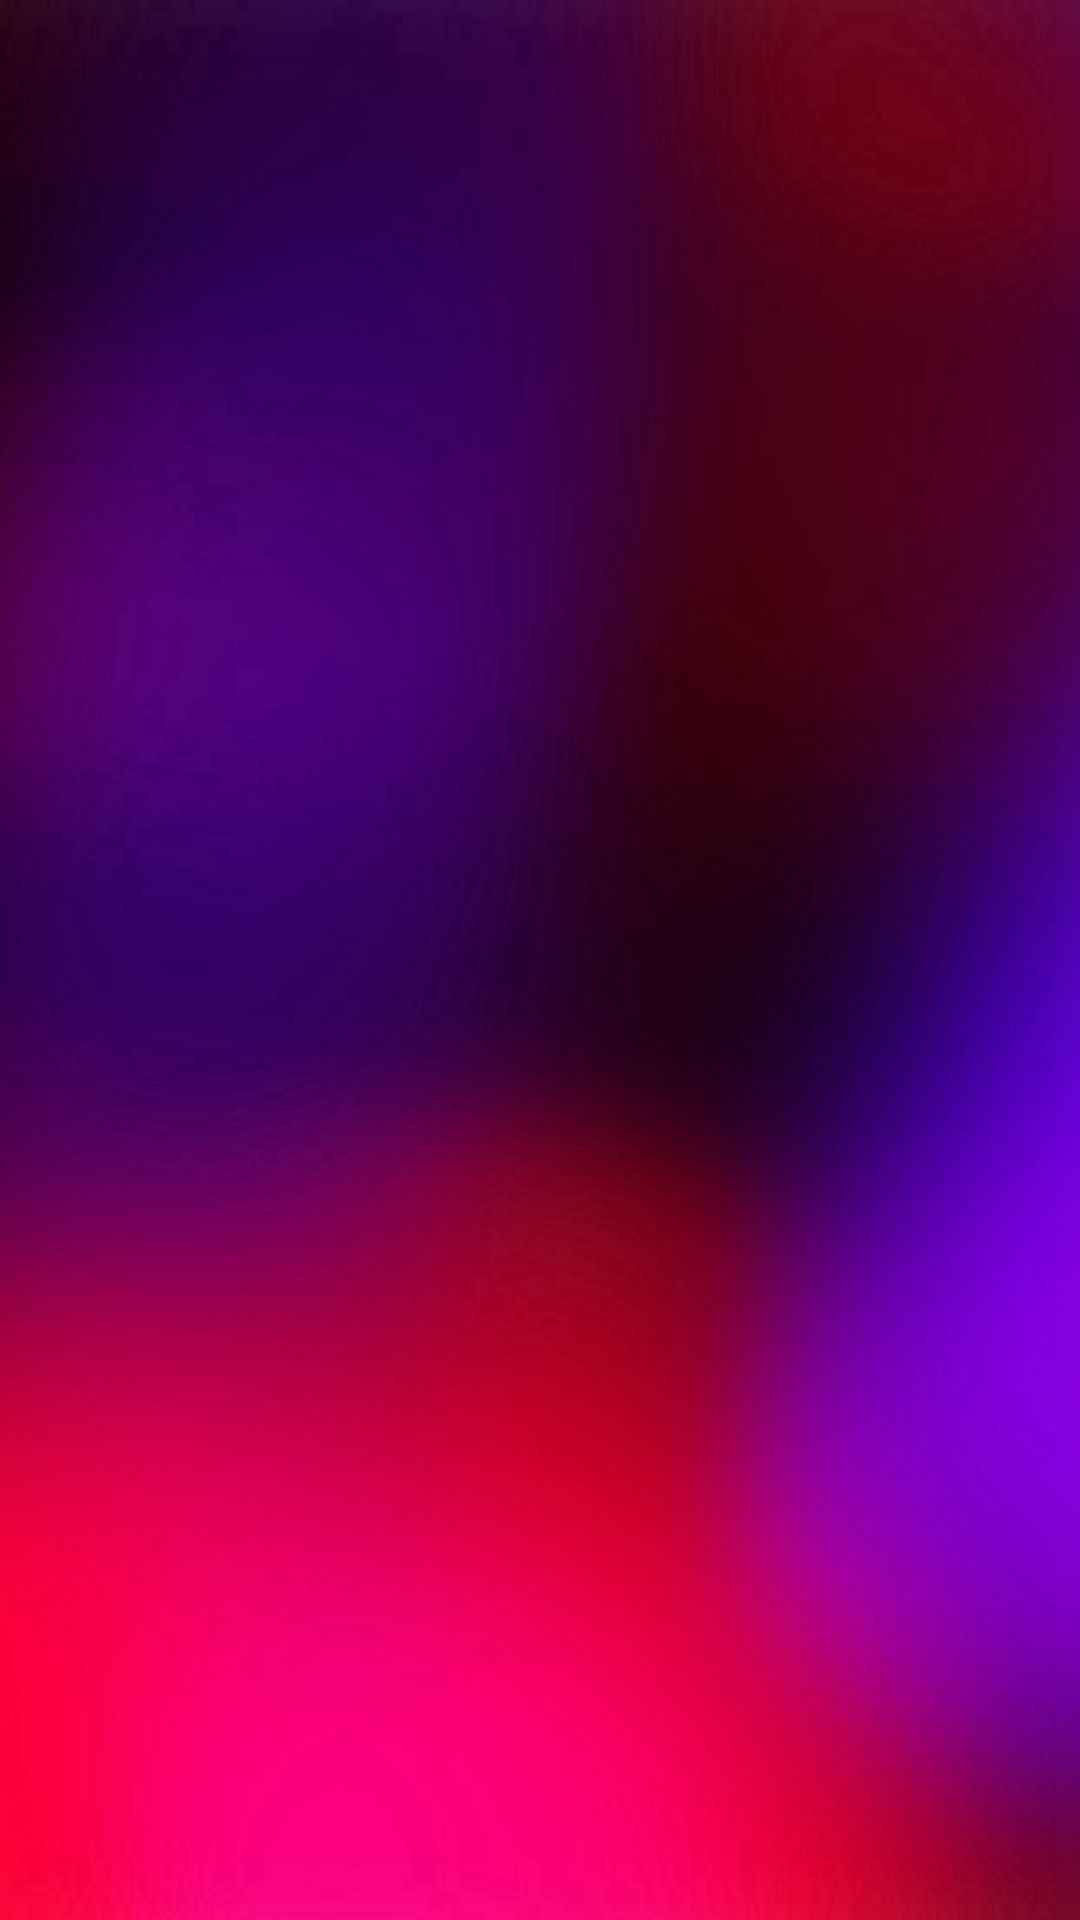 Blue Red And Purple Wallpapers Wallpaper Cave